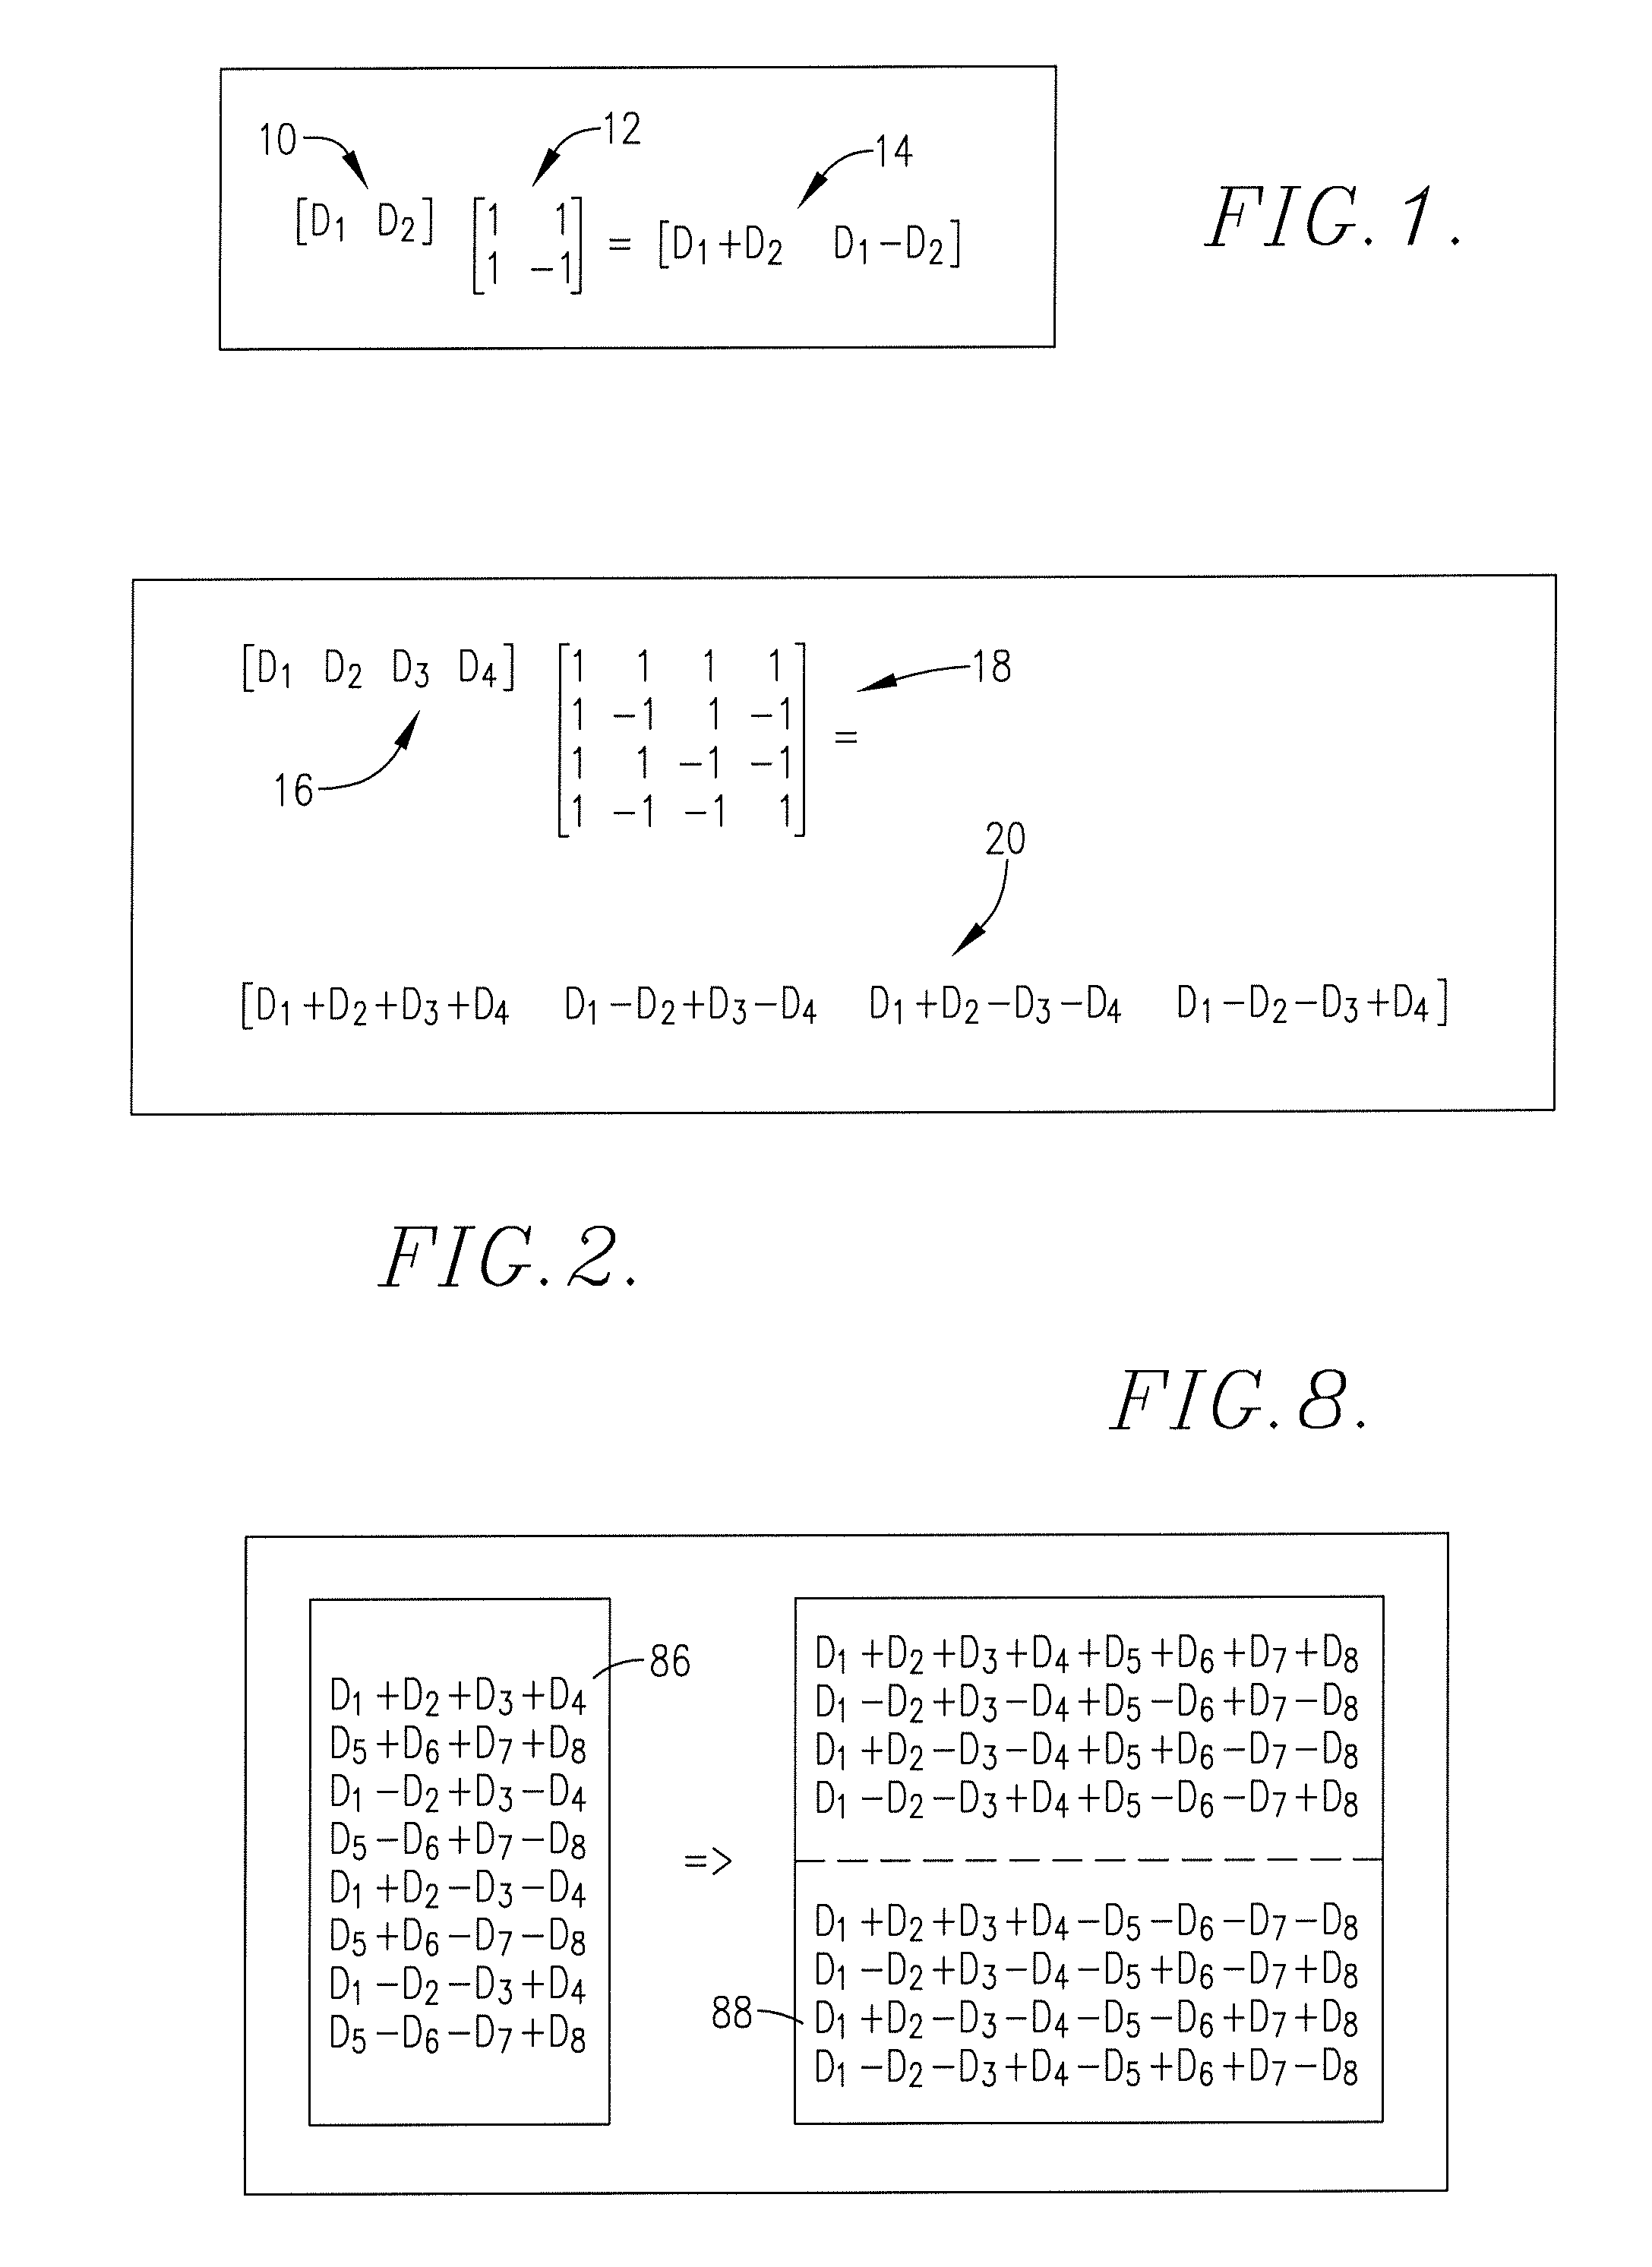 System and method for performing an optimized discrete walsh transform